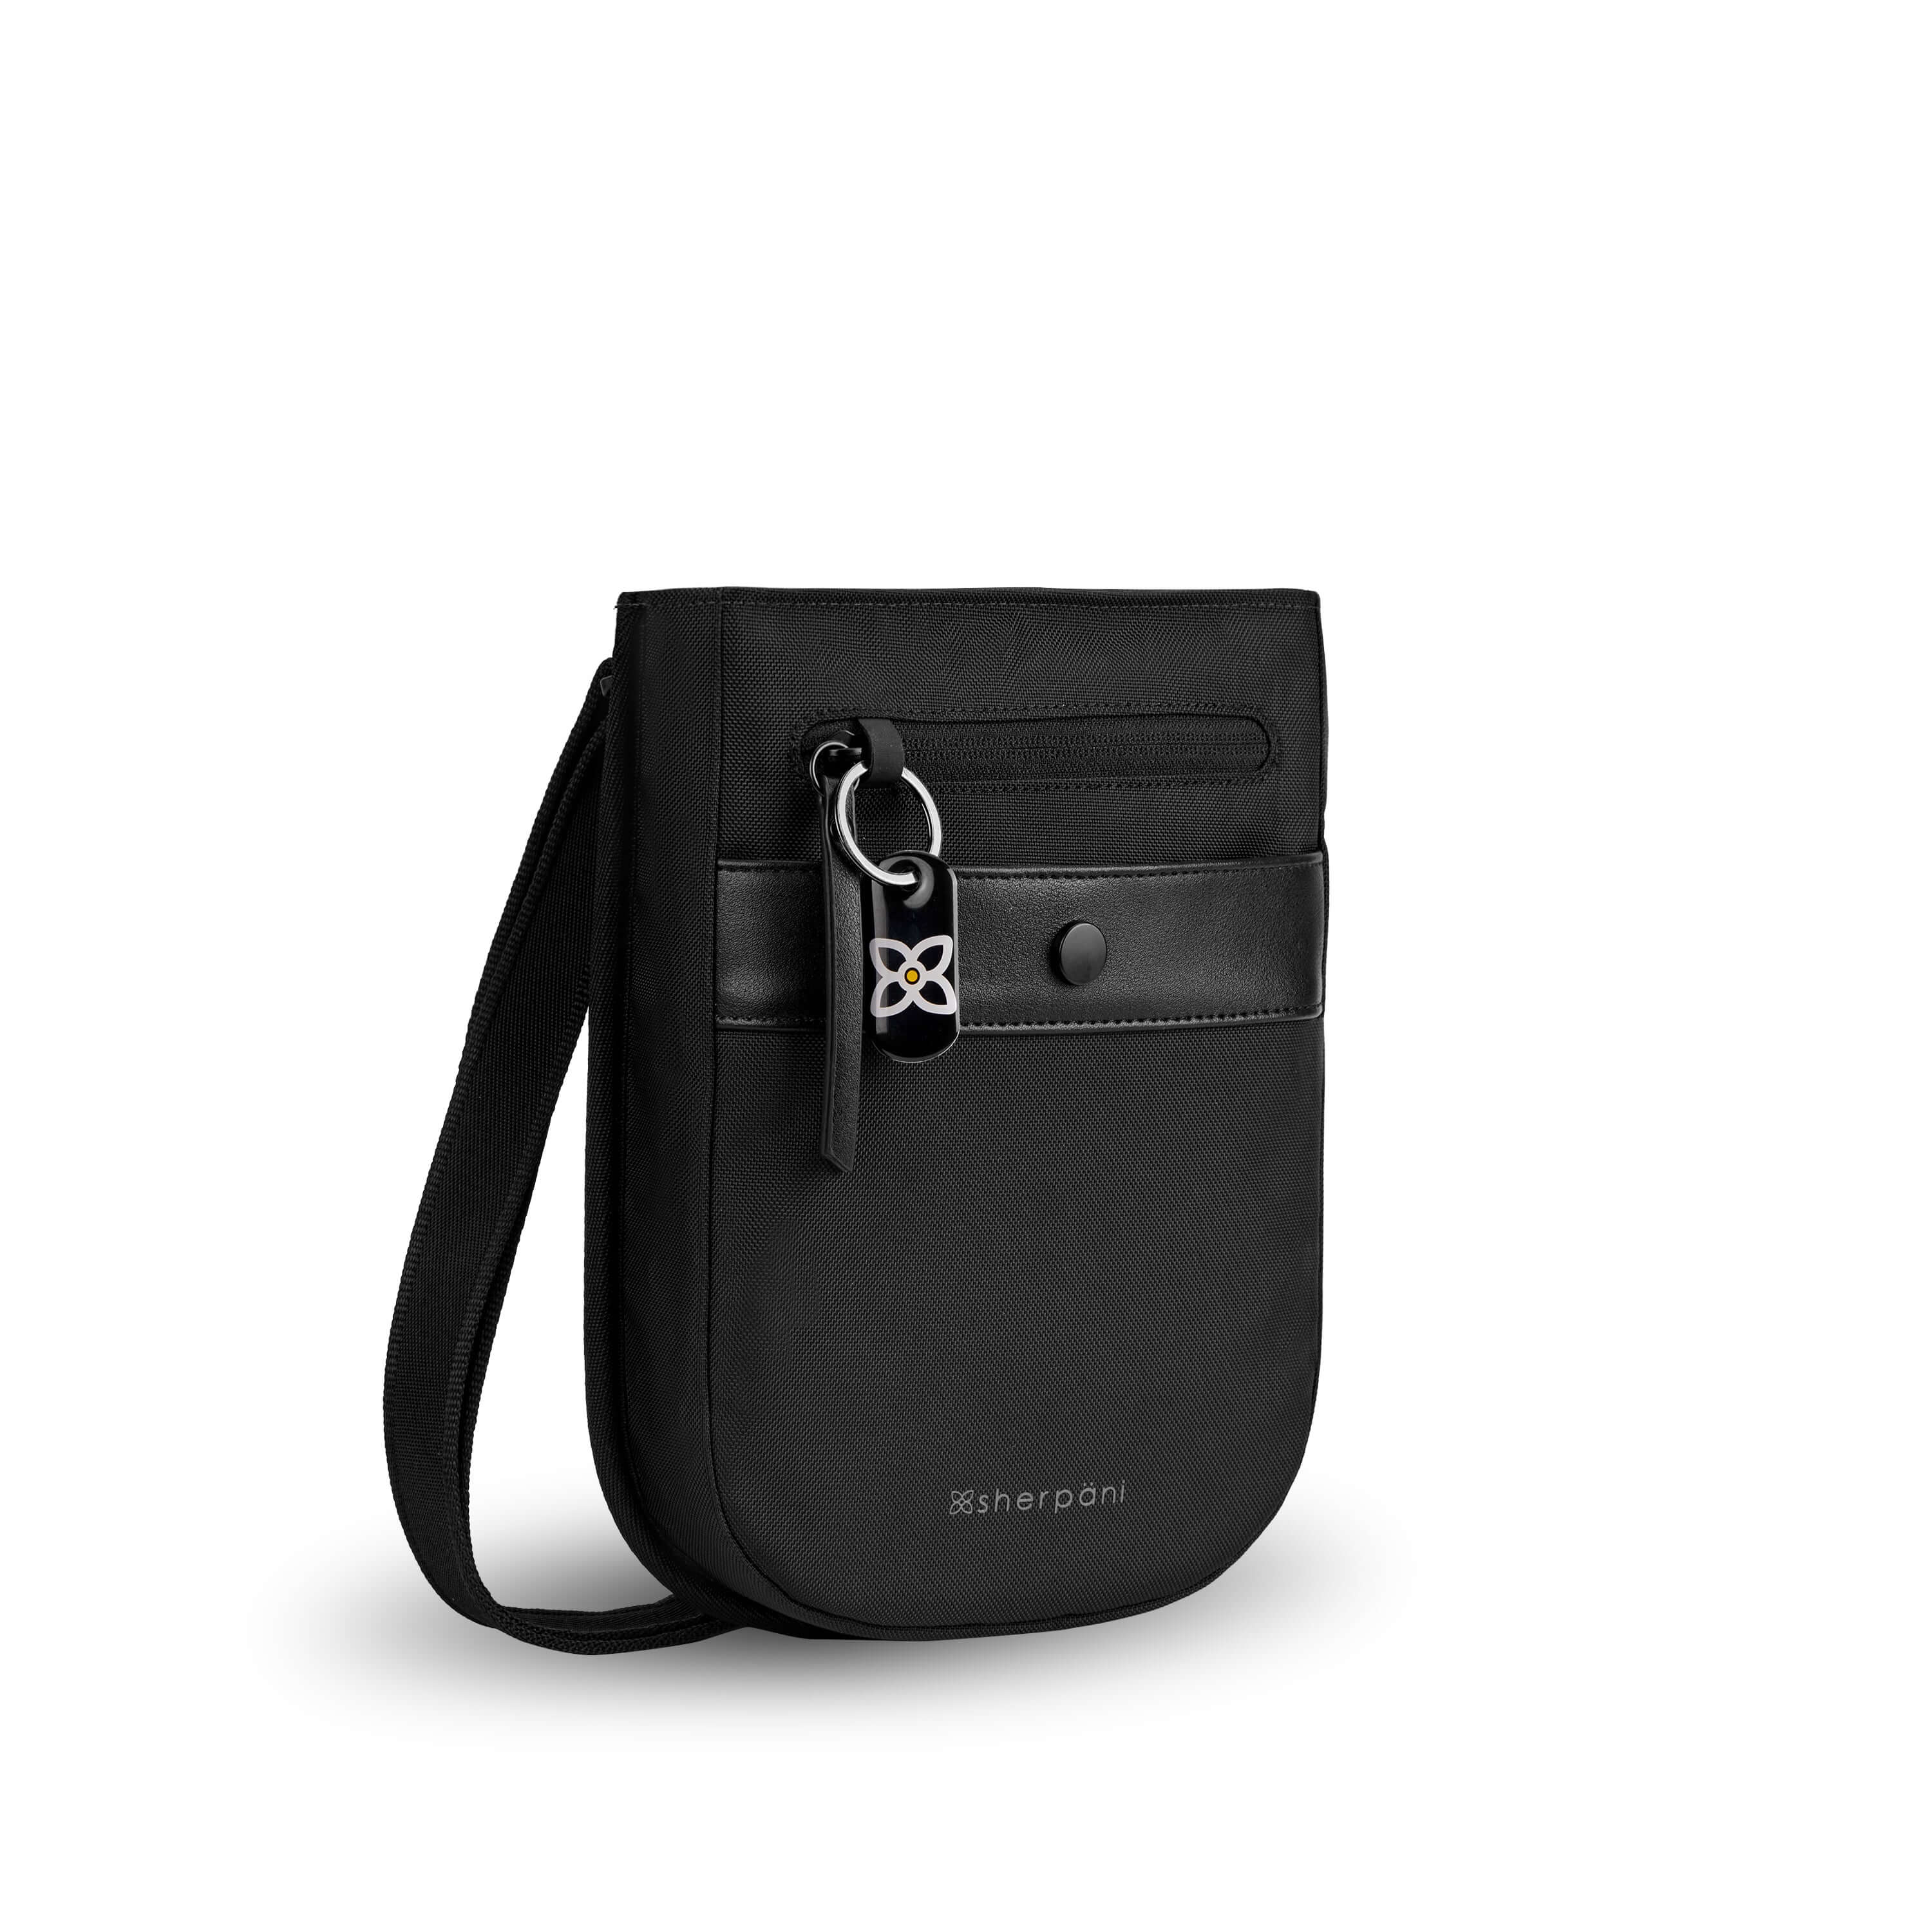 Angled front view of Sherpani’s Anti-Theft bag, the Prima AT in Carbon, with vegan leather accents in black. There is an external pouch on the front of the bag that sits below a locking zipper compartment, which has a ReturnMe tag clipped to it. The bag features an adjustable crossbody strap. #color_carbon